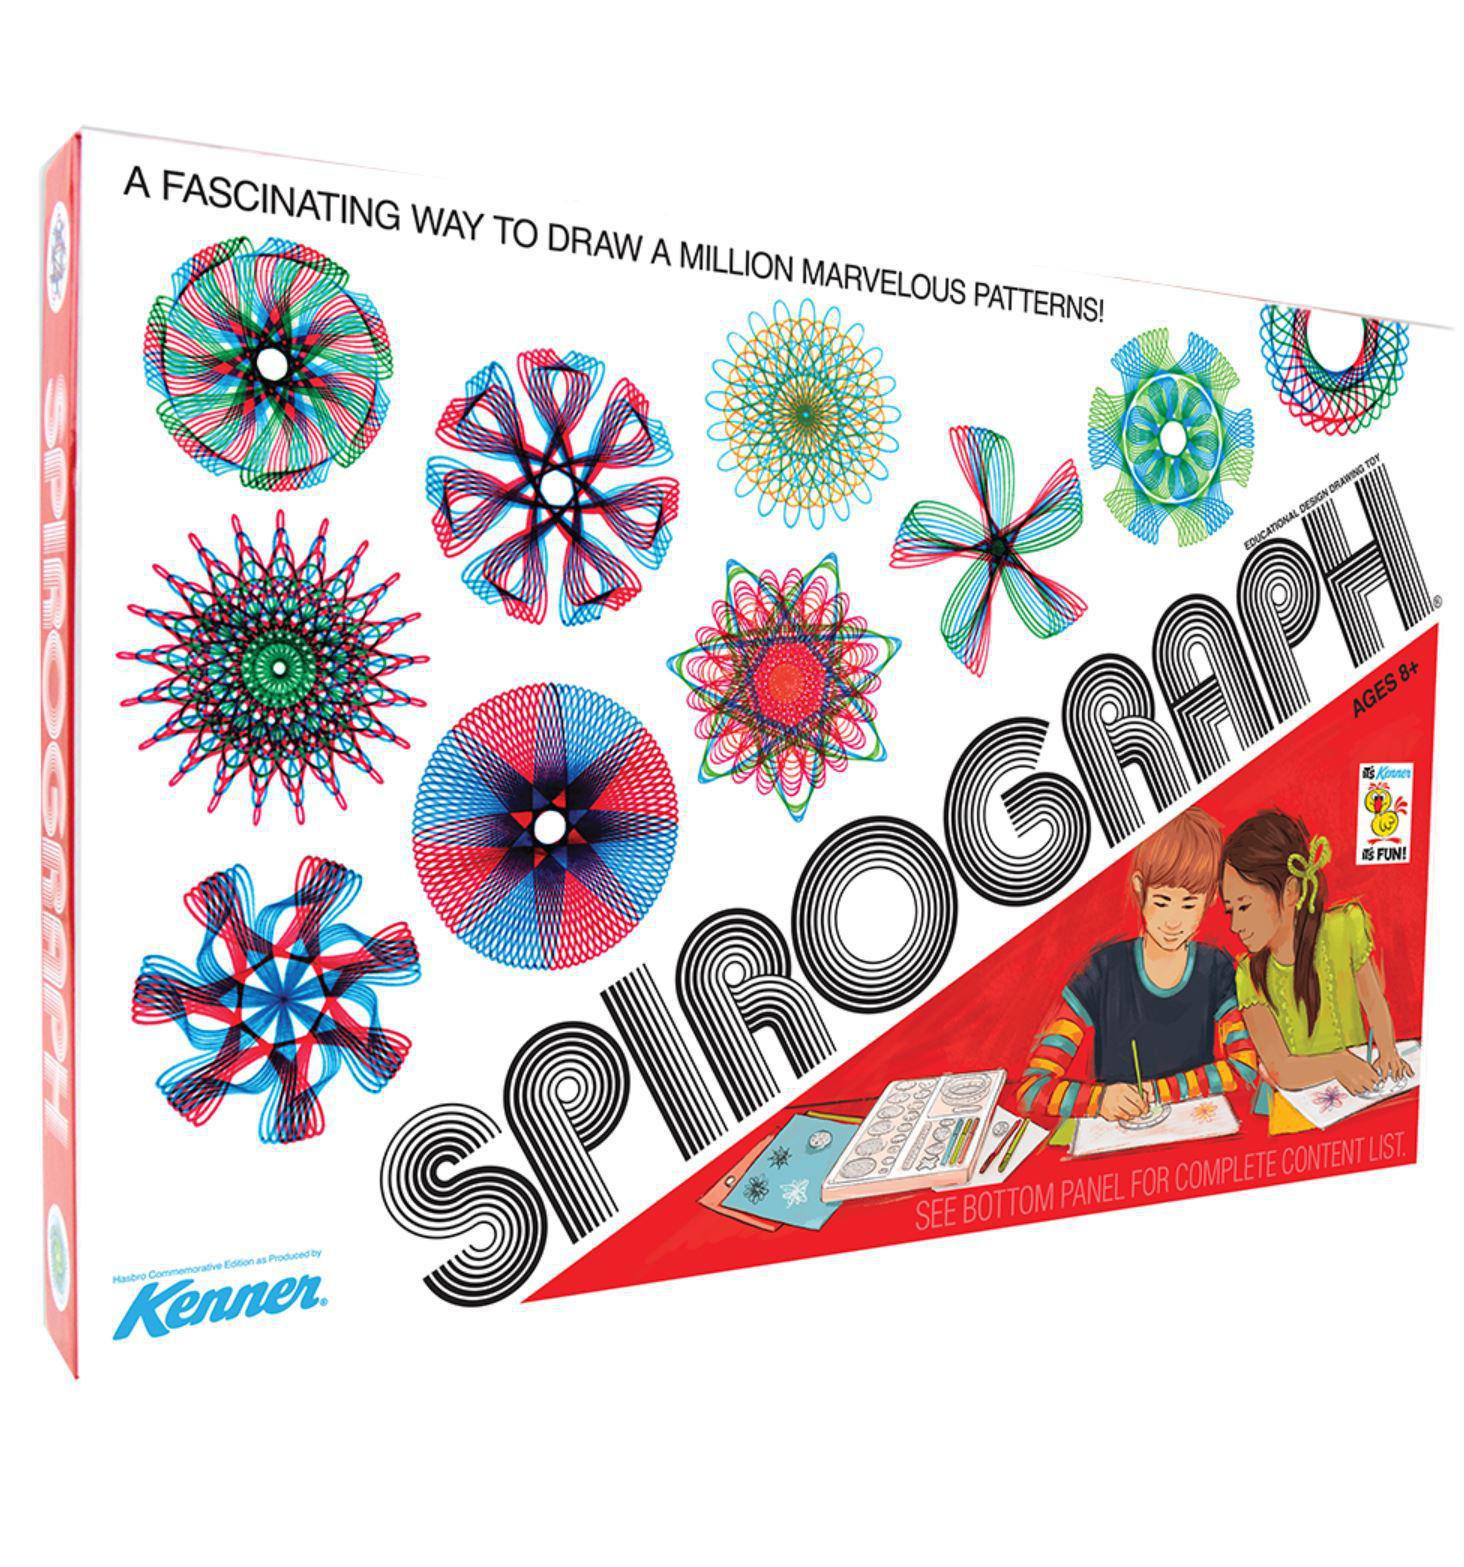 Spirograph The Original with Markers